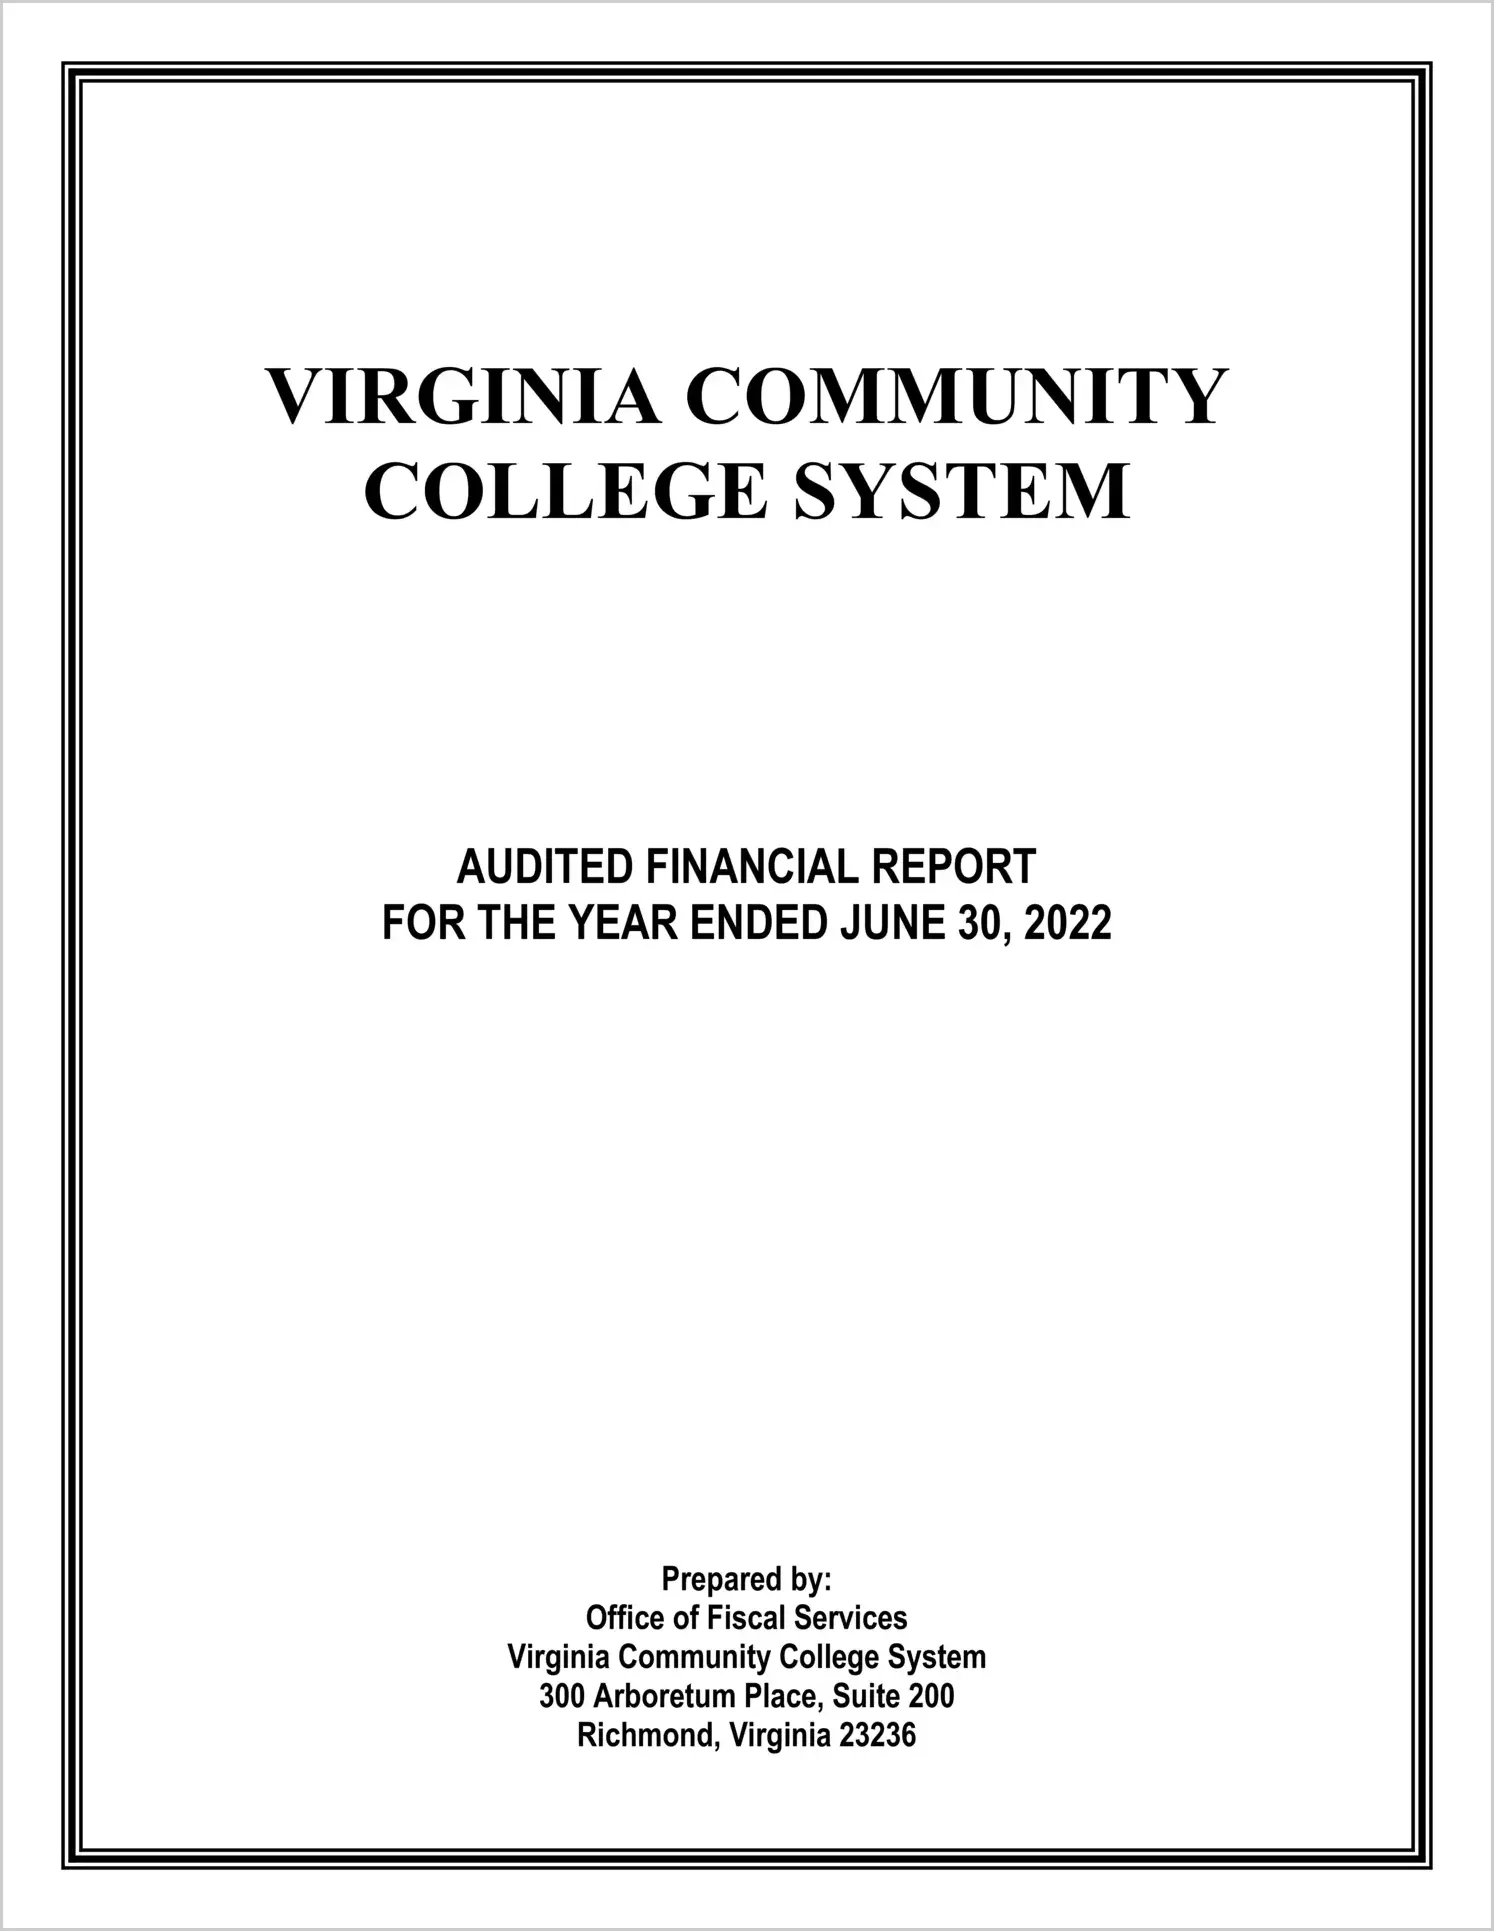 Virginia Community College System Financial Statements for the year ended June 30, 2022